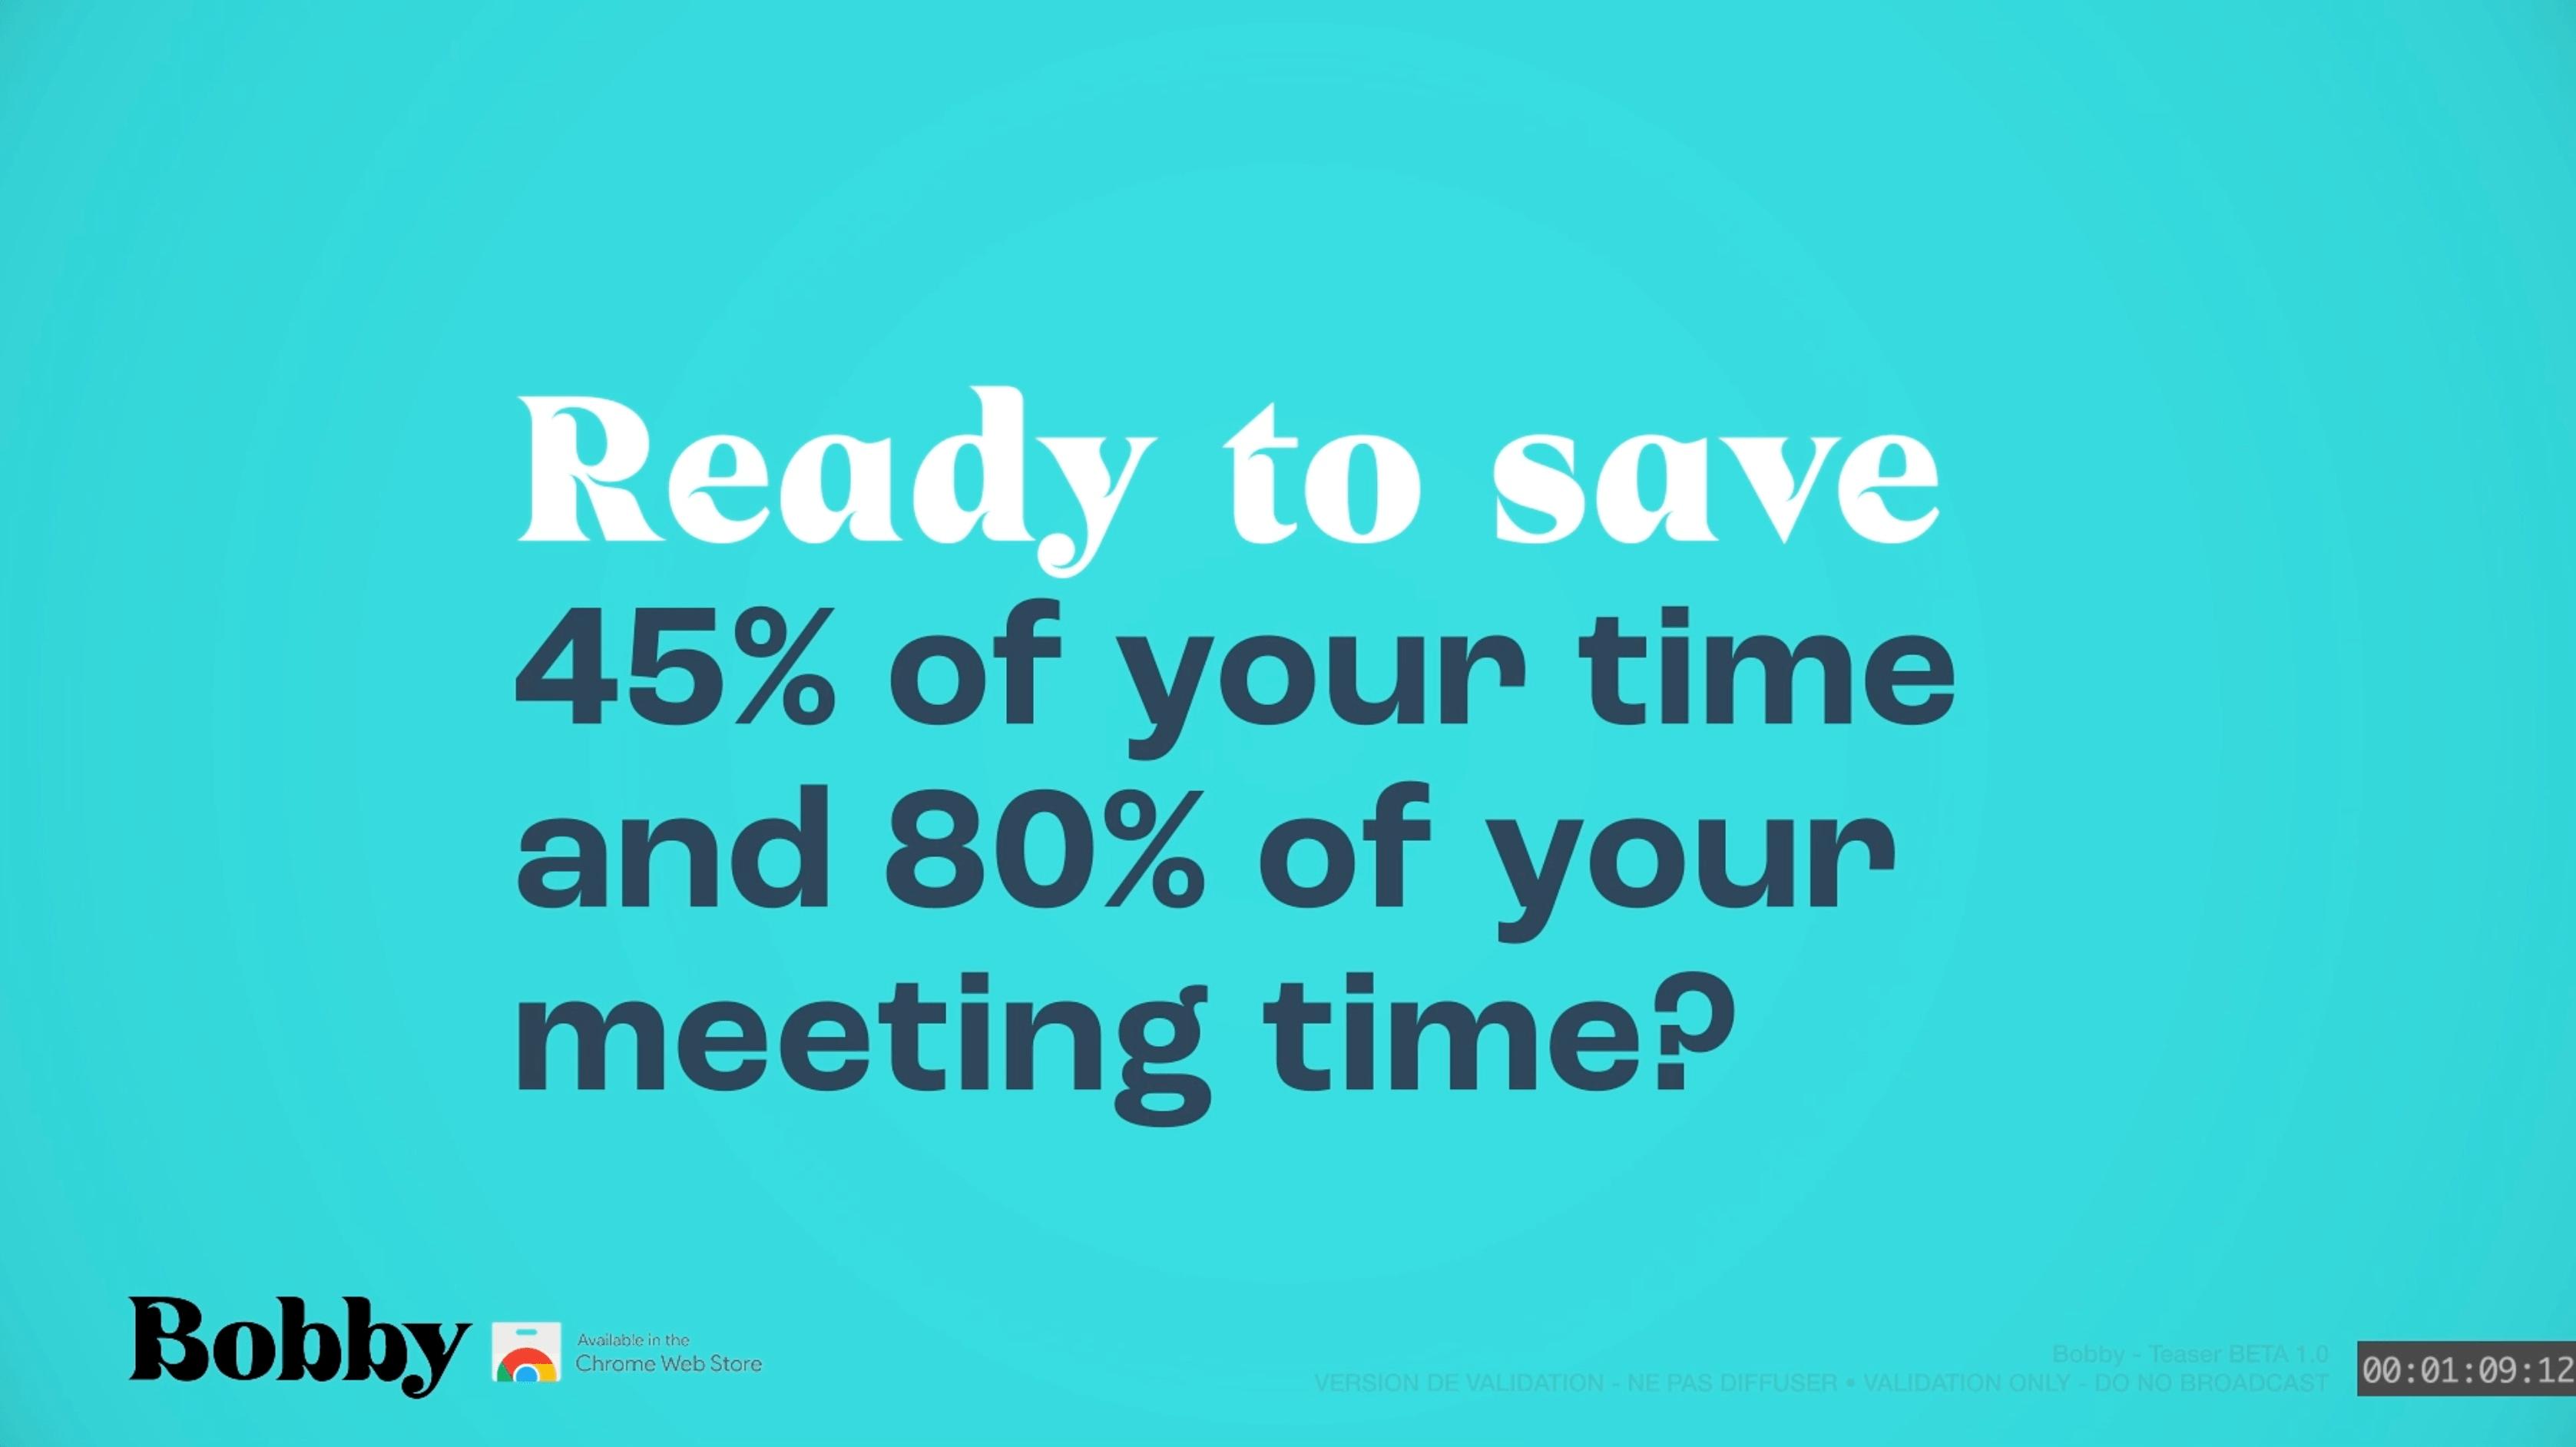 Bobby meetings - Save 80% of your meeting time!